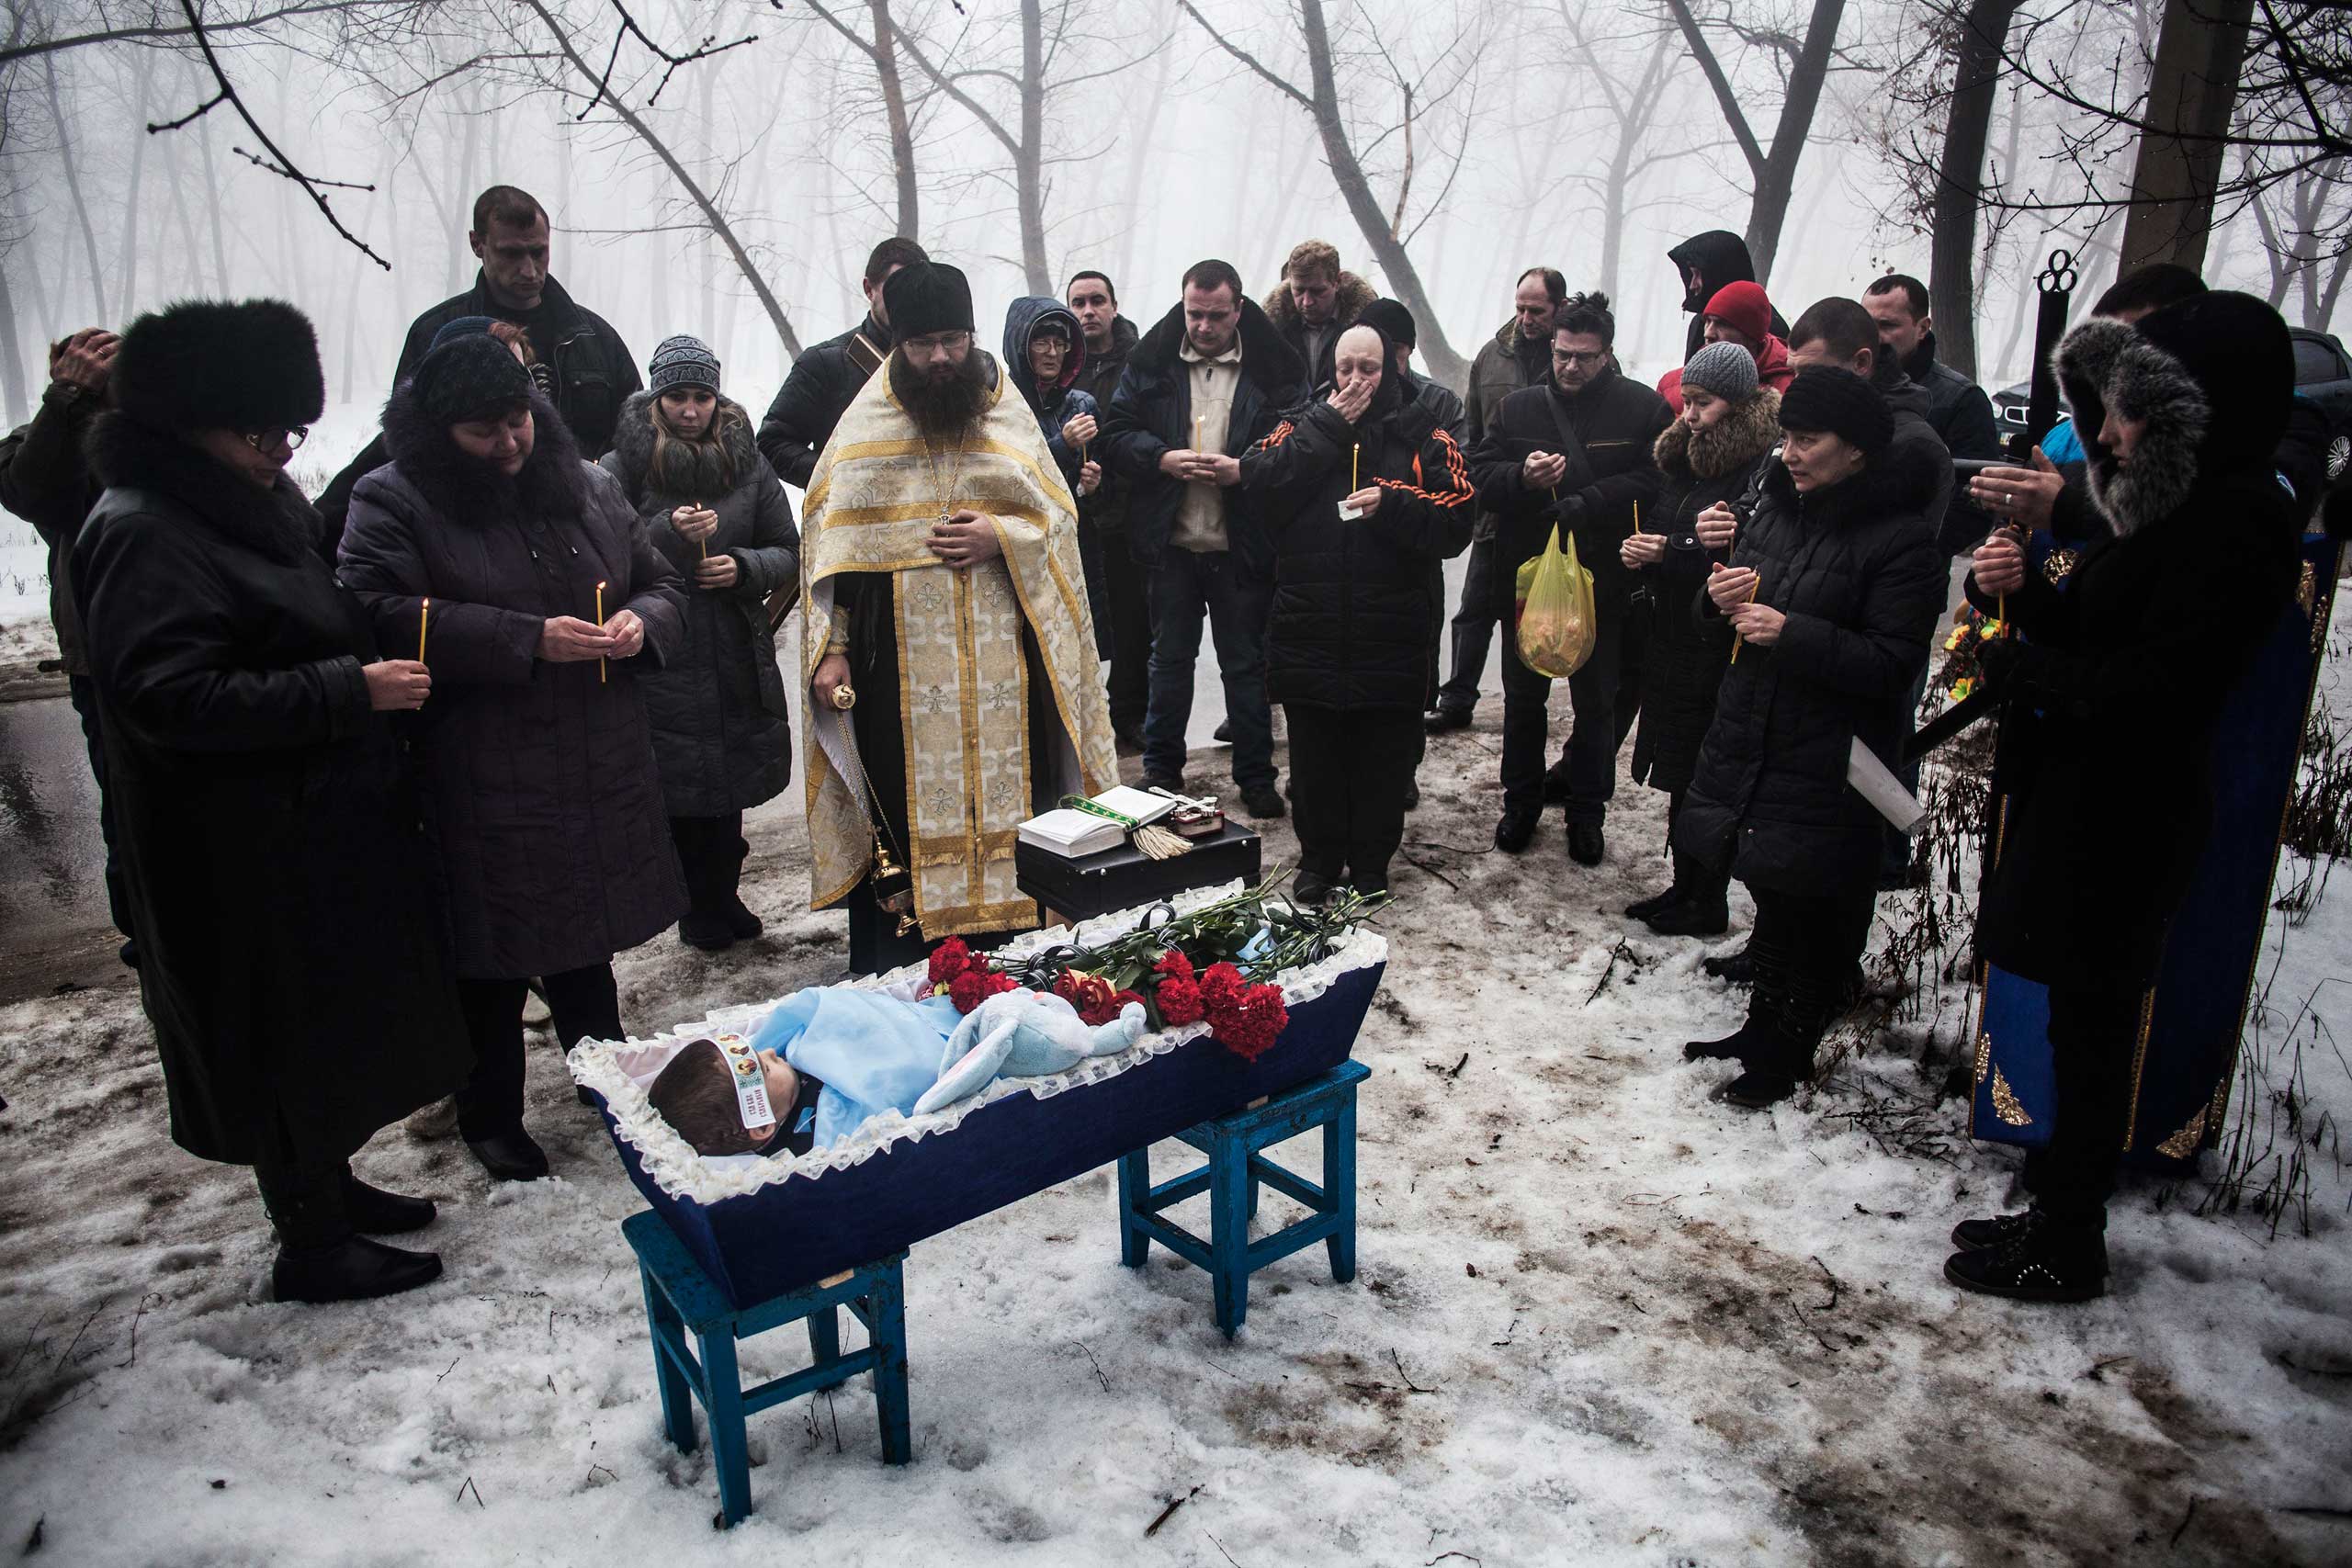 Jan. 20, 2015. Mourners gather around a coffin bearing Artiam, 4, who was killed in a Ukrainian army artillery strike, during his funeral in Kuivisevsky district on the outskirts of Donetsk, eastern Ukraine. At least three civilians were killed in shelling as fighting continued between government and rebel forces in the separatist-held city of Donetsk.